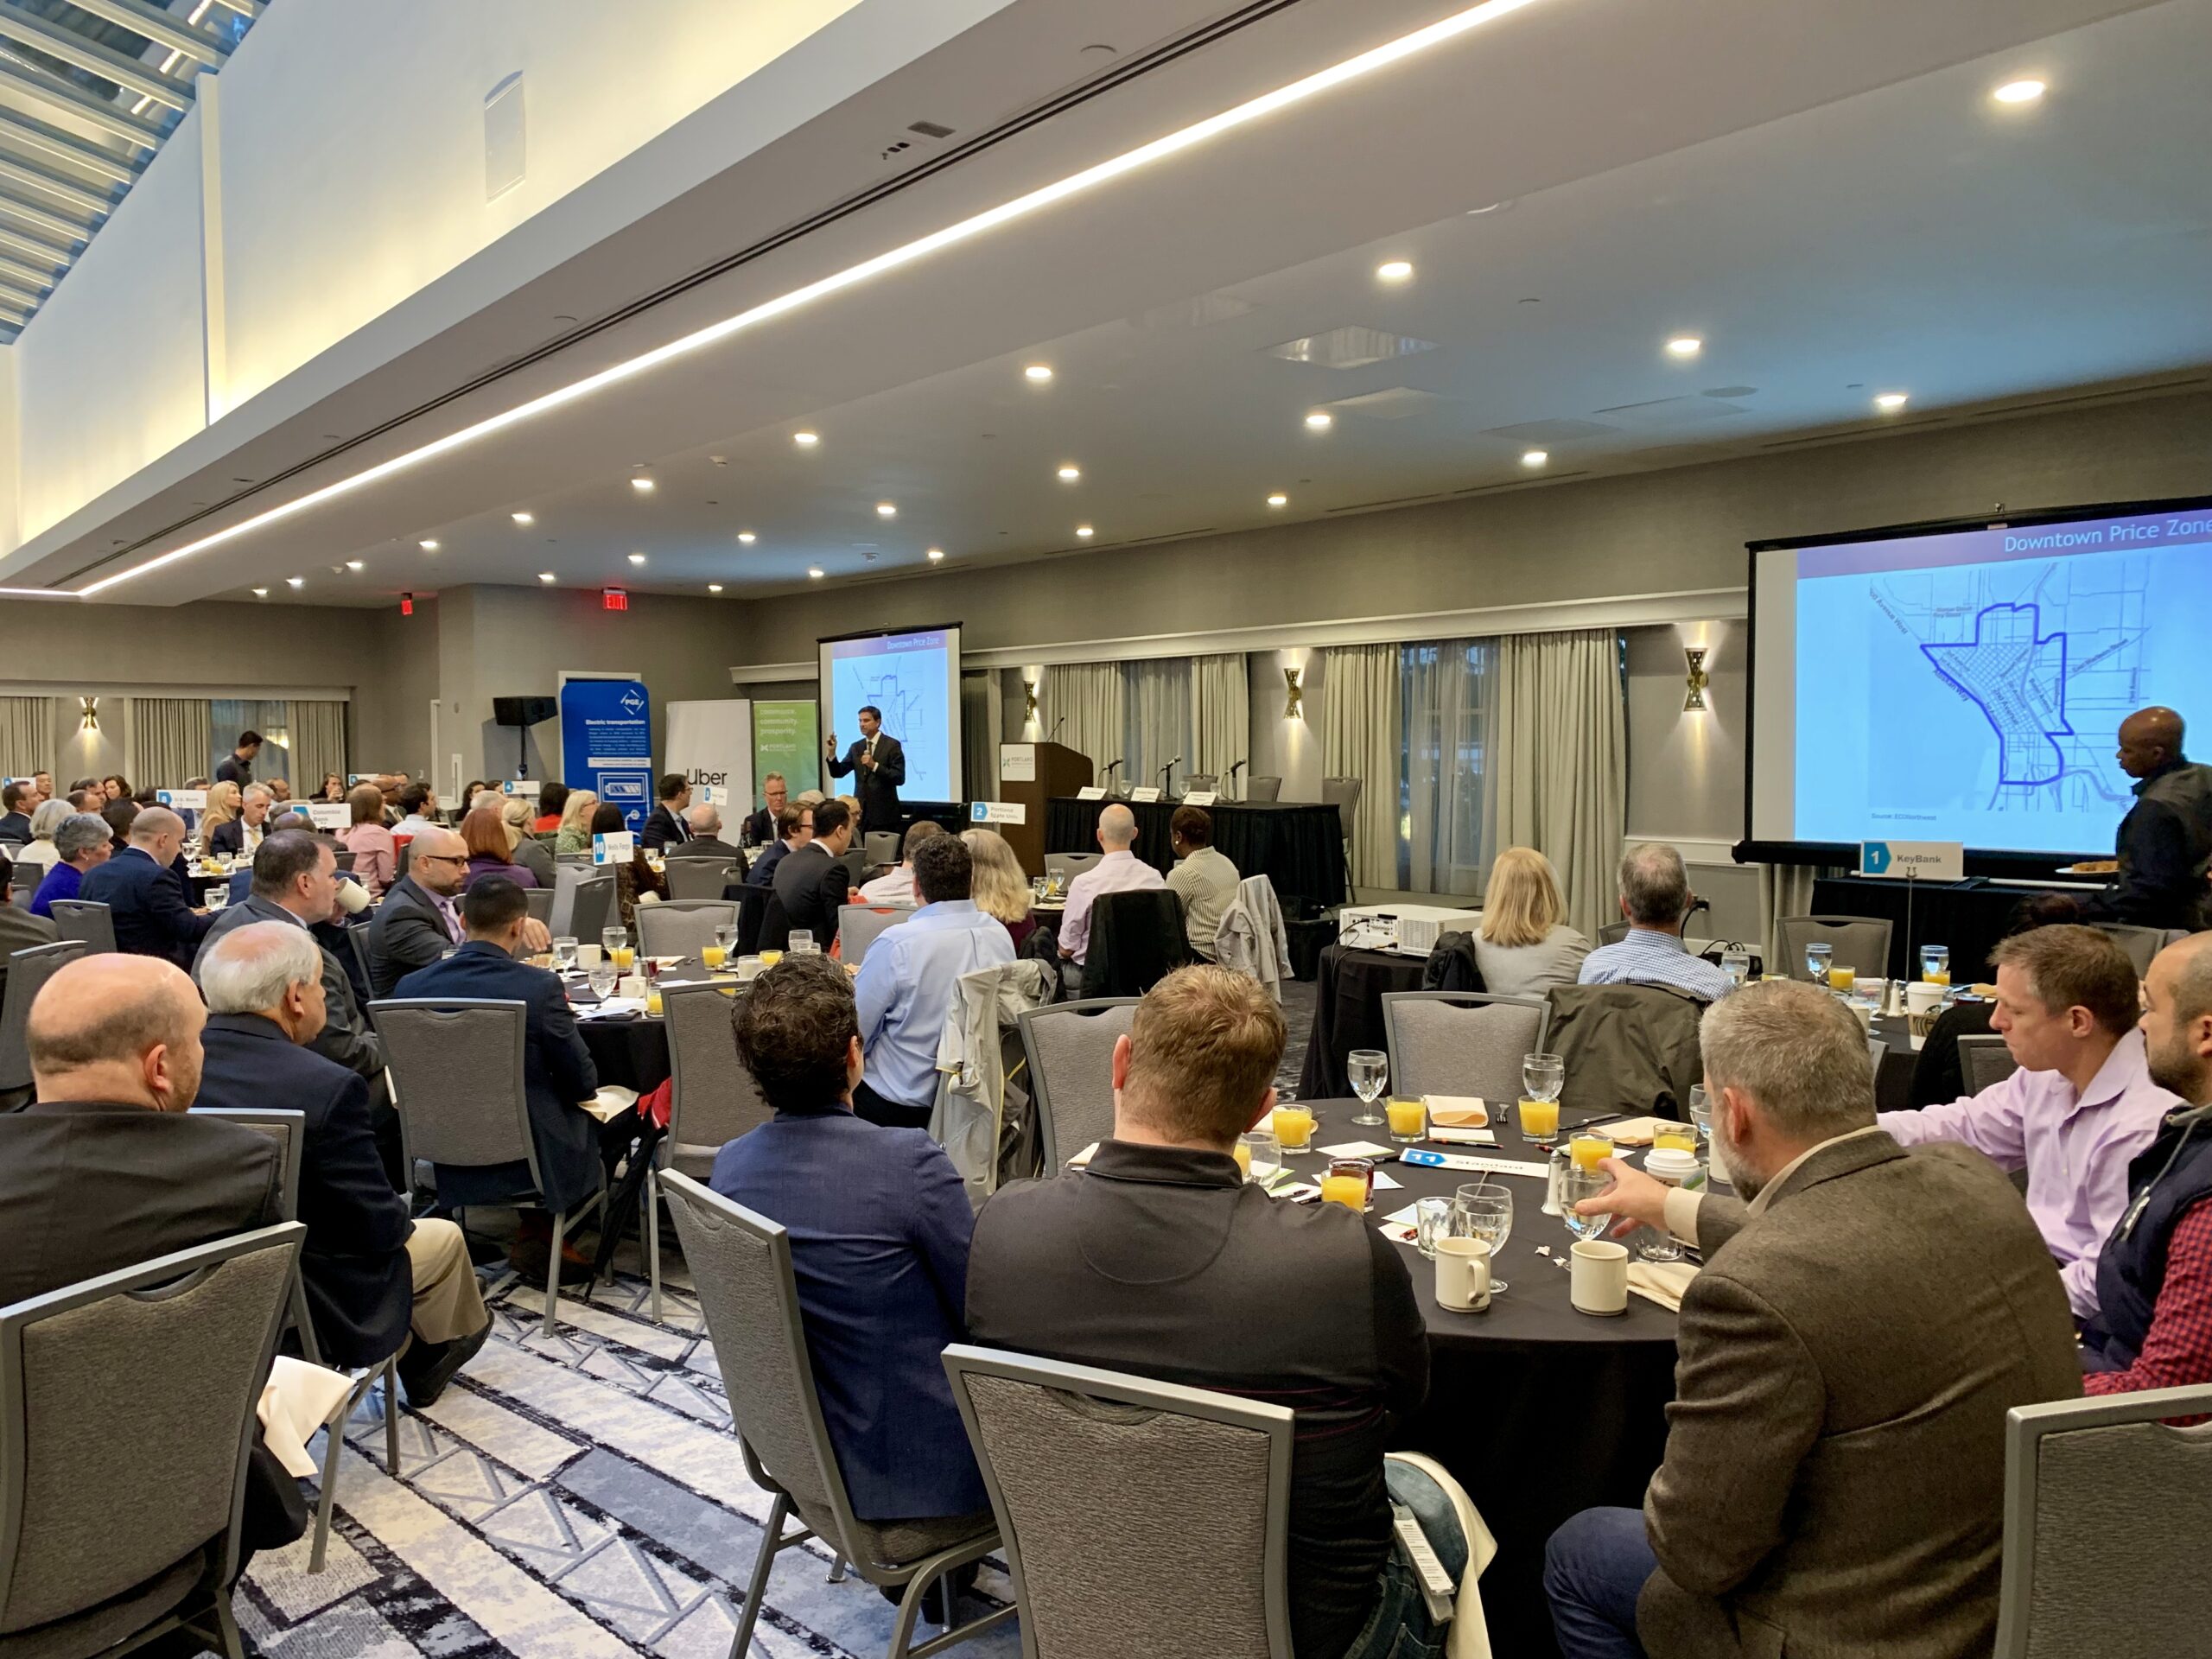 Attendees at a 2019 Breakfast Forum event